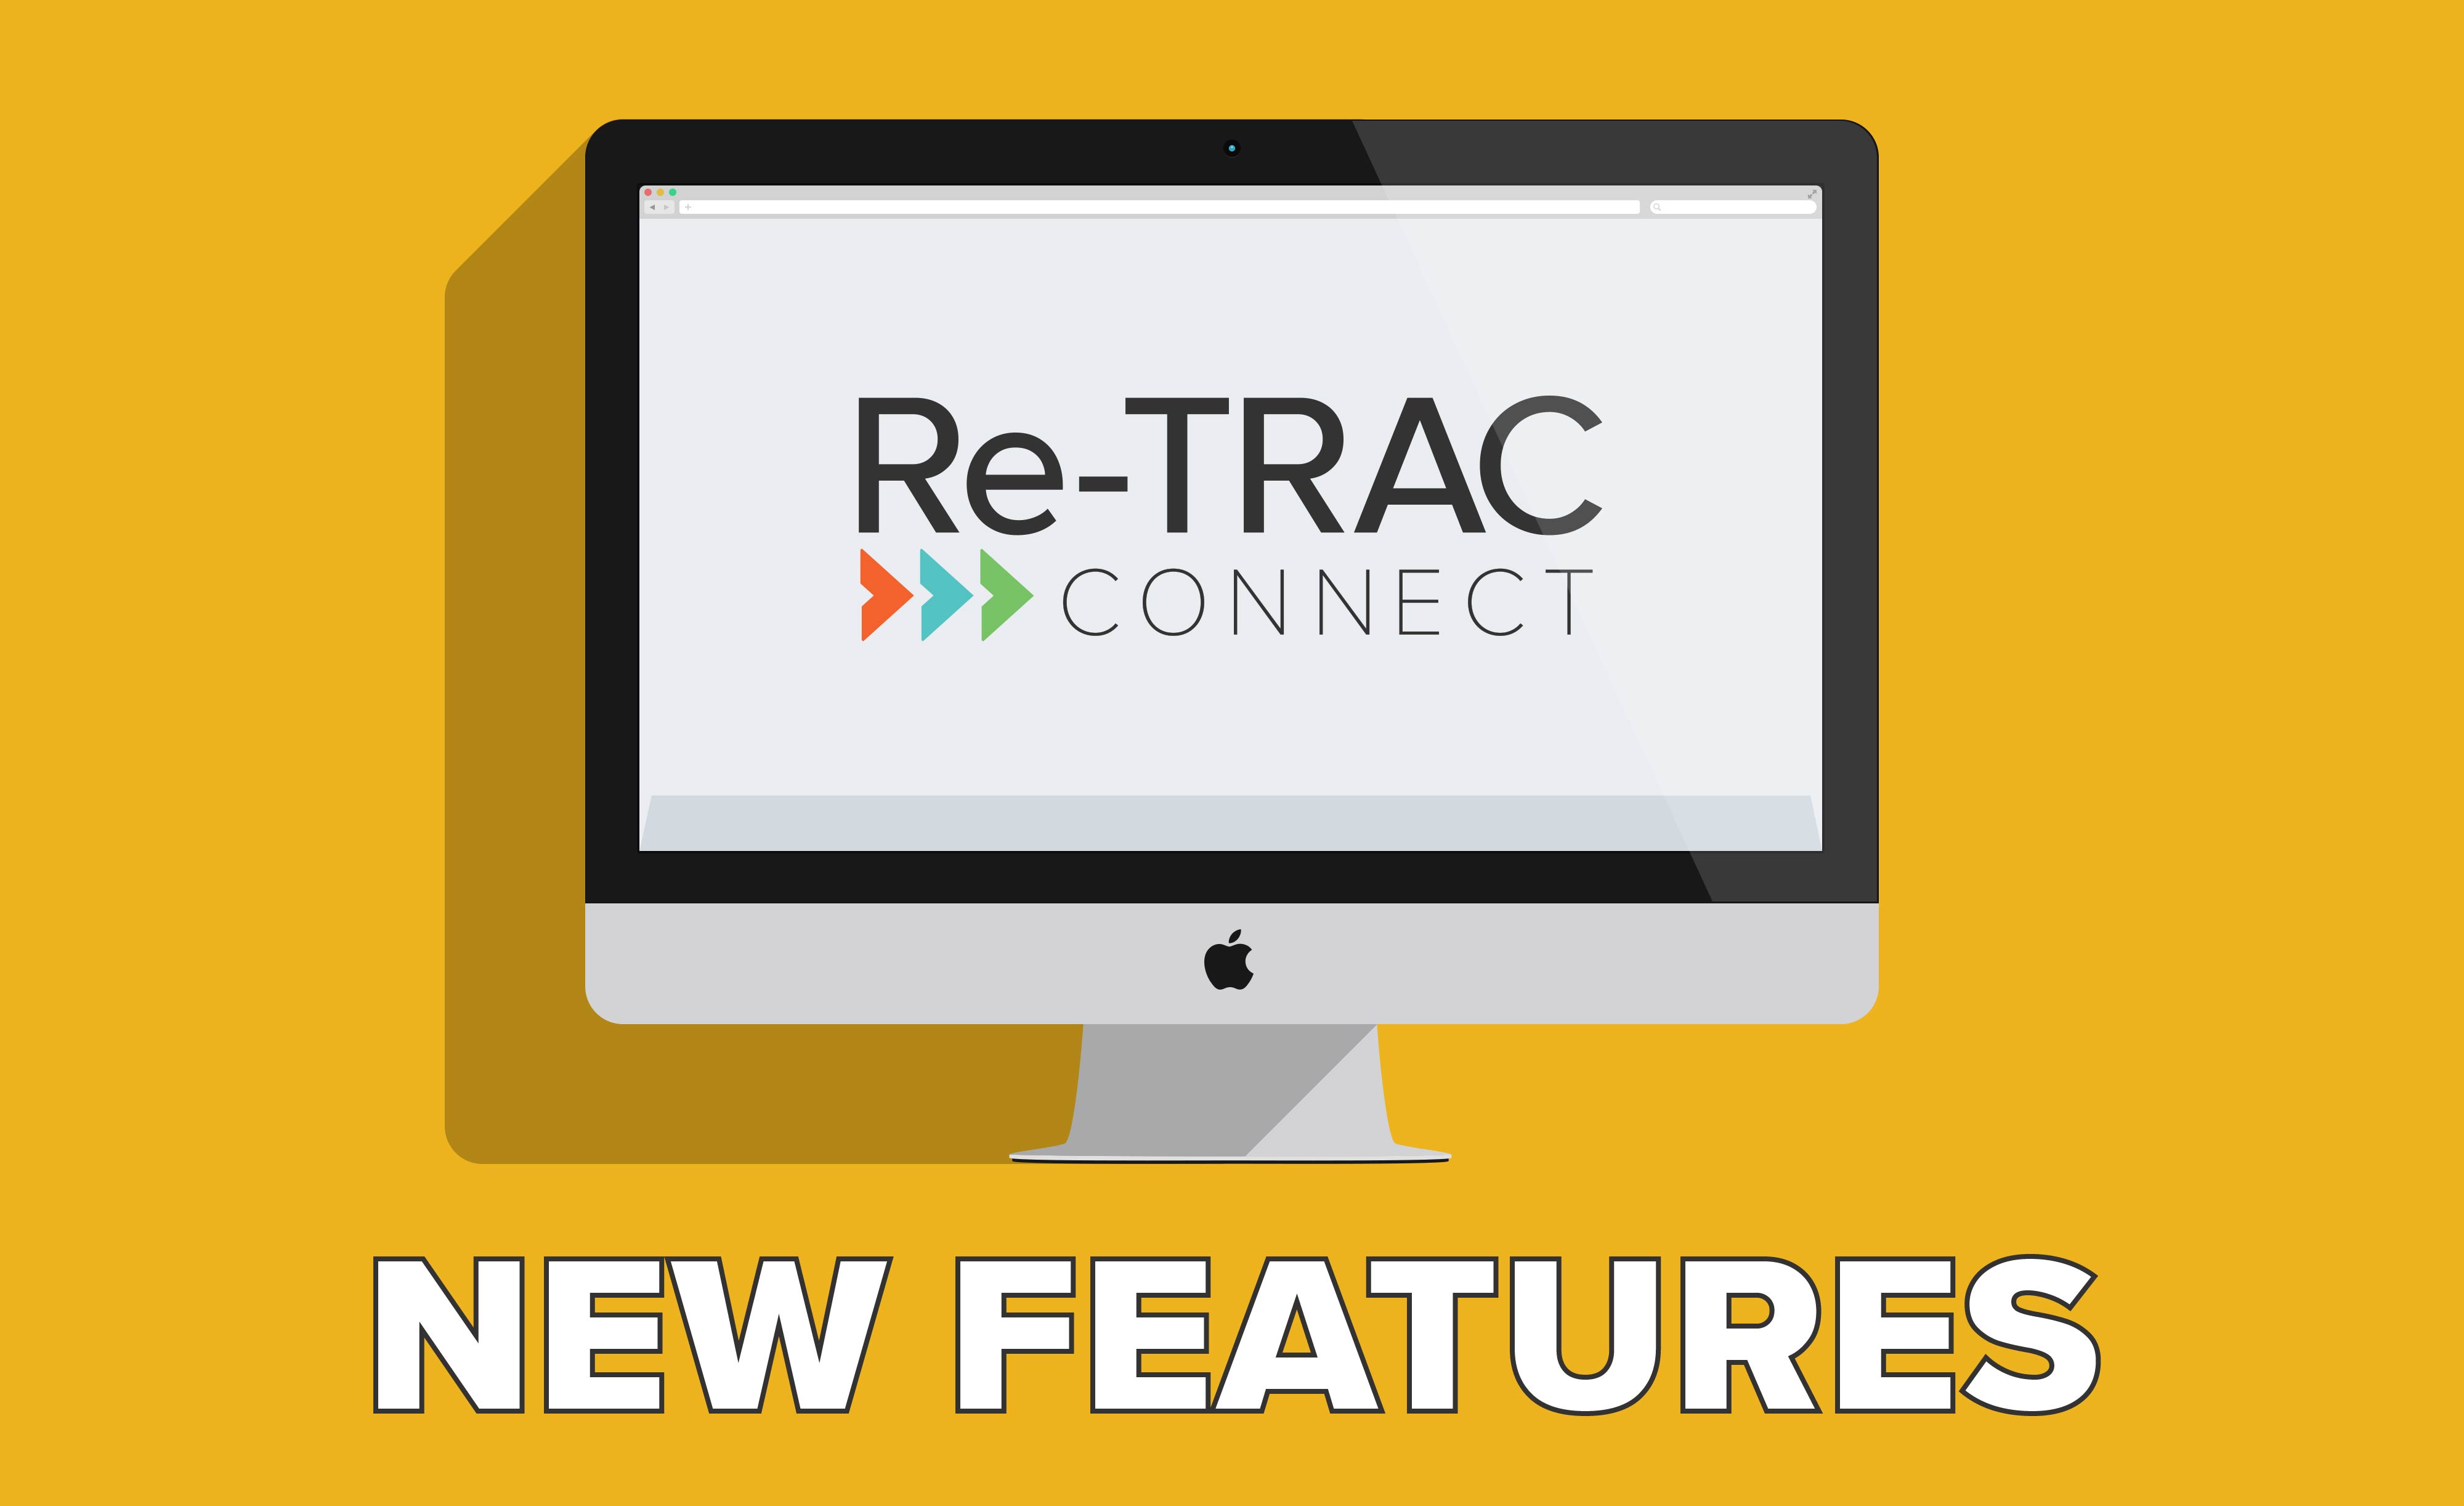 Re-TRAC Connect makes exporting EASY